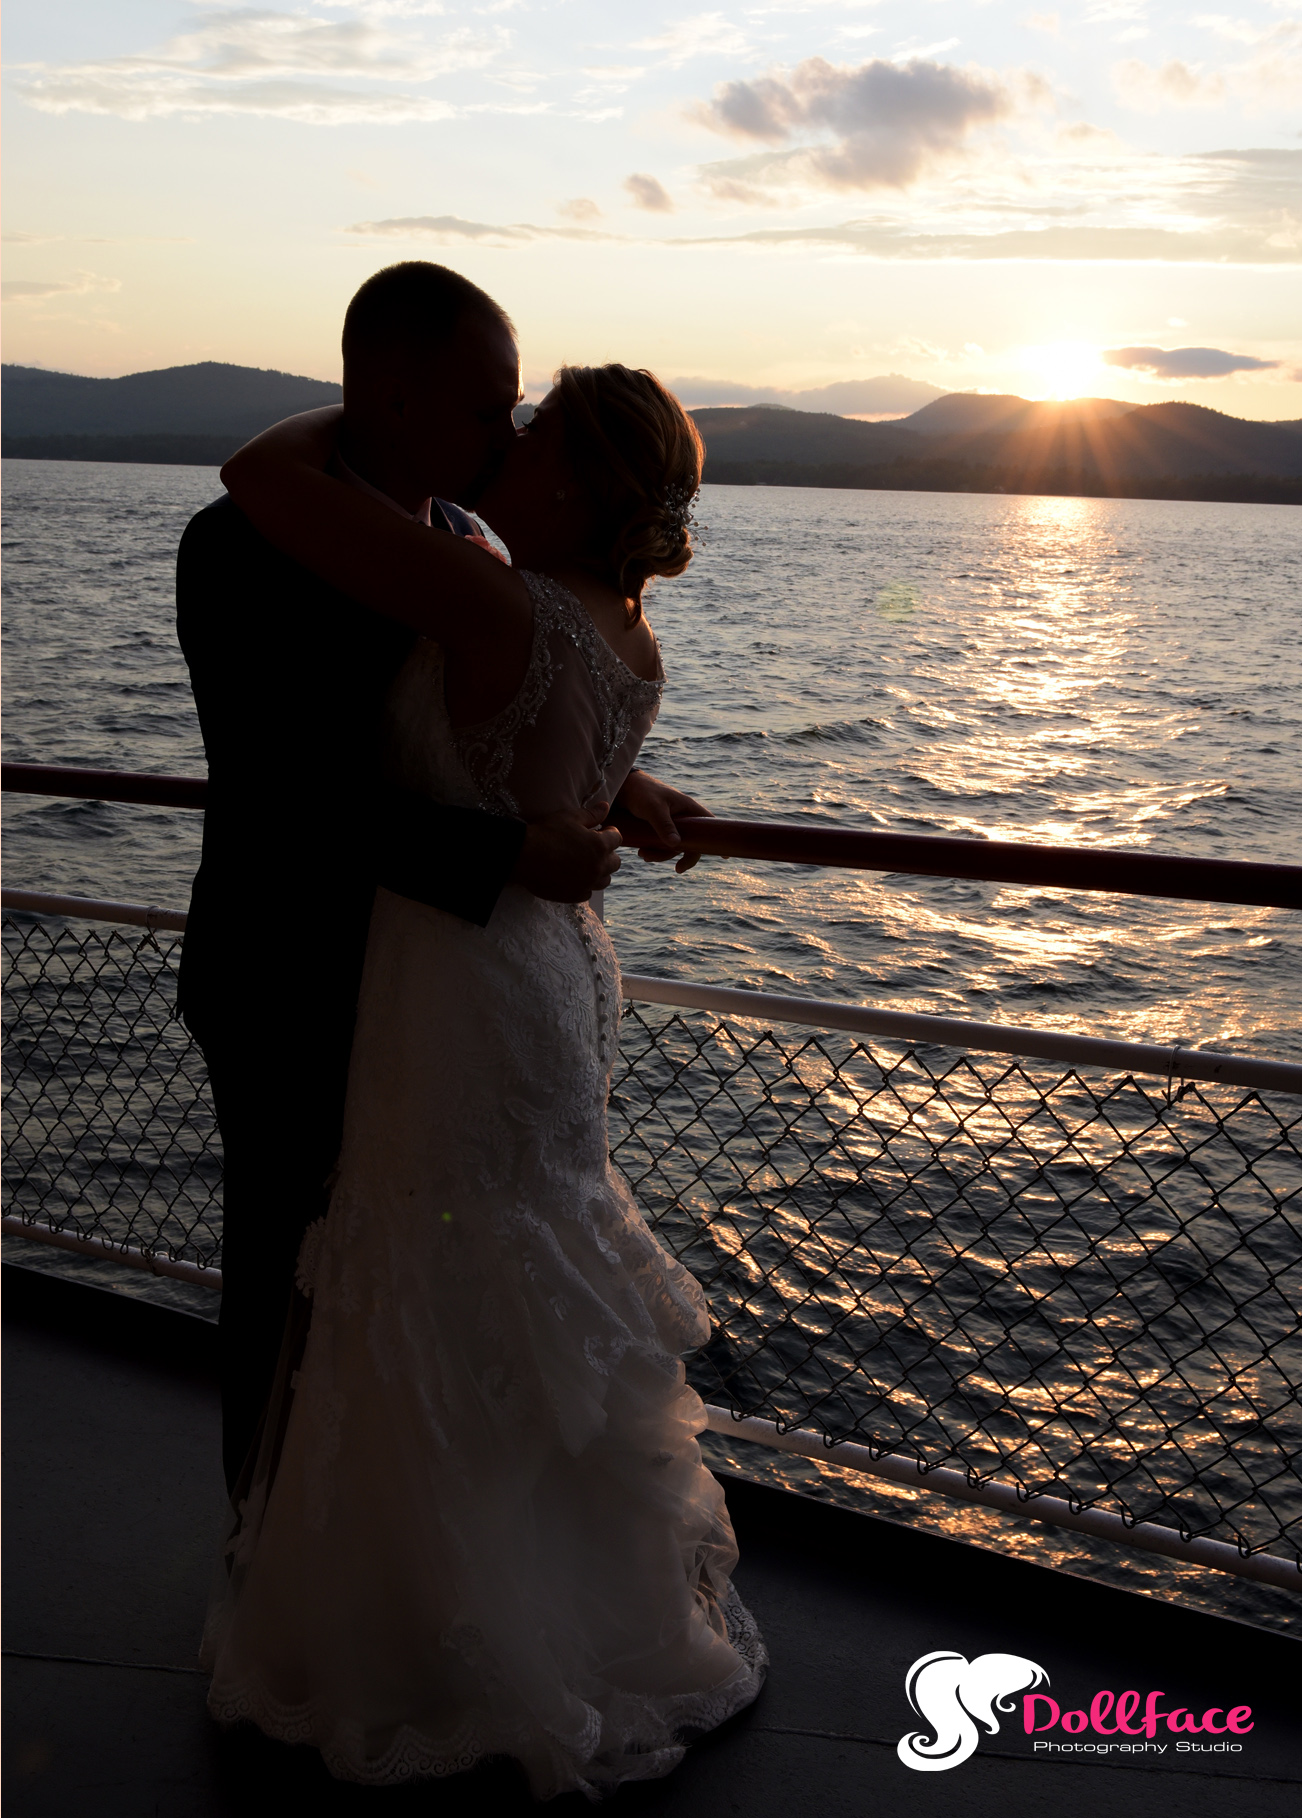 Wedding on Steamboat in Lake George, NY